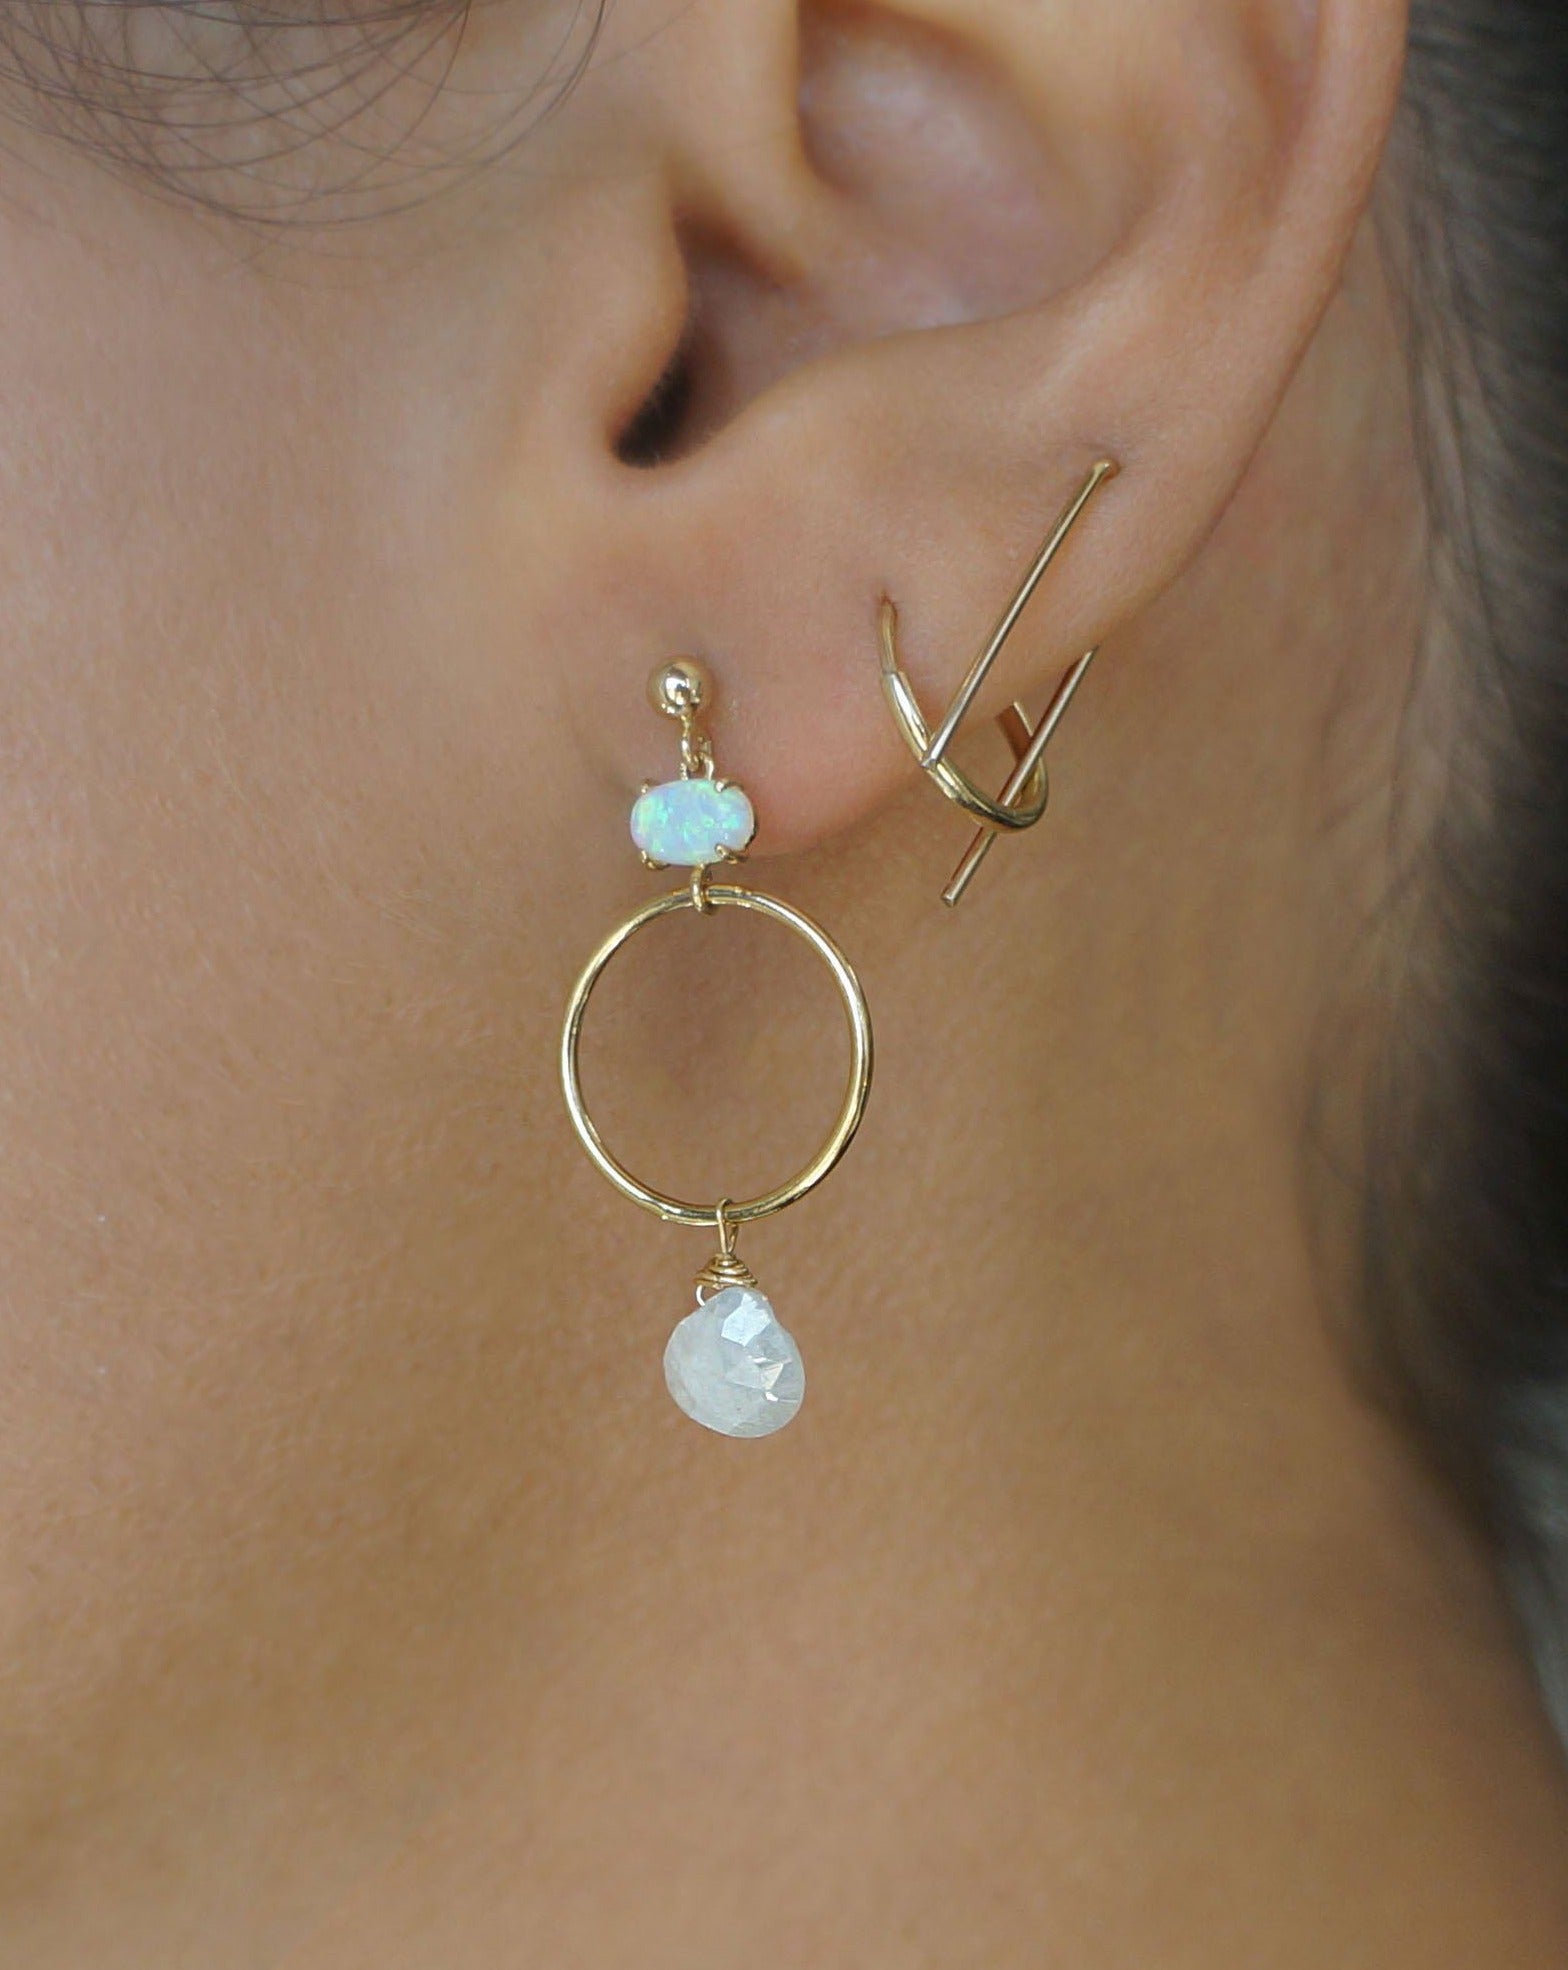 Azuu Earrings by KOZAKH. A 1 1/2 inch dangling earrings in 14K Gold Filled, featuring an Opal charm and a faceted White Sapphire.